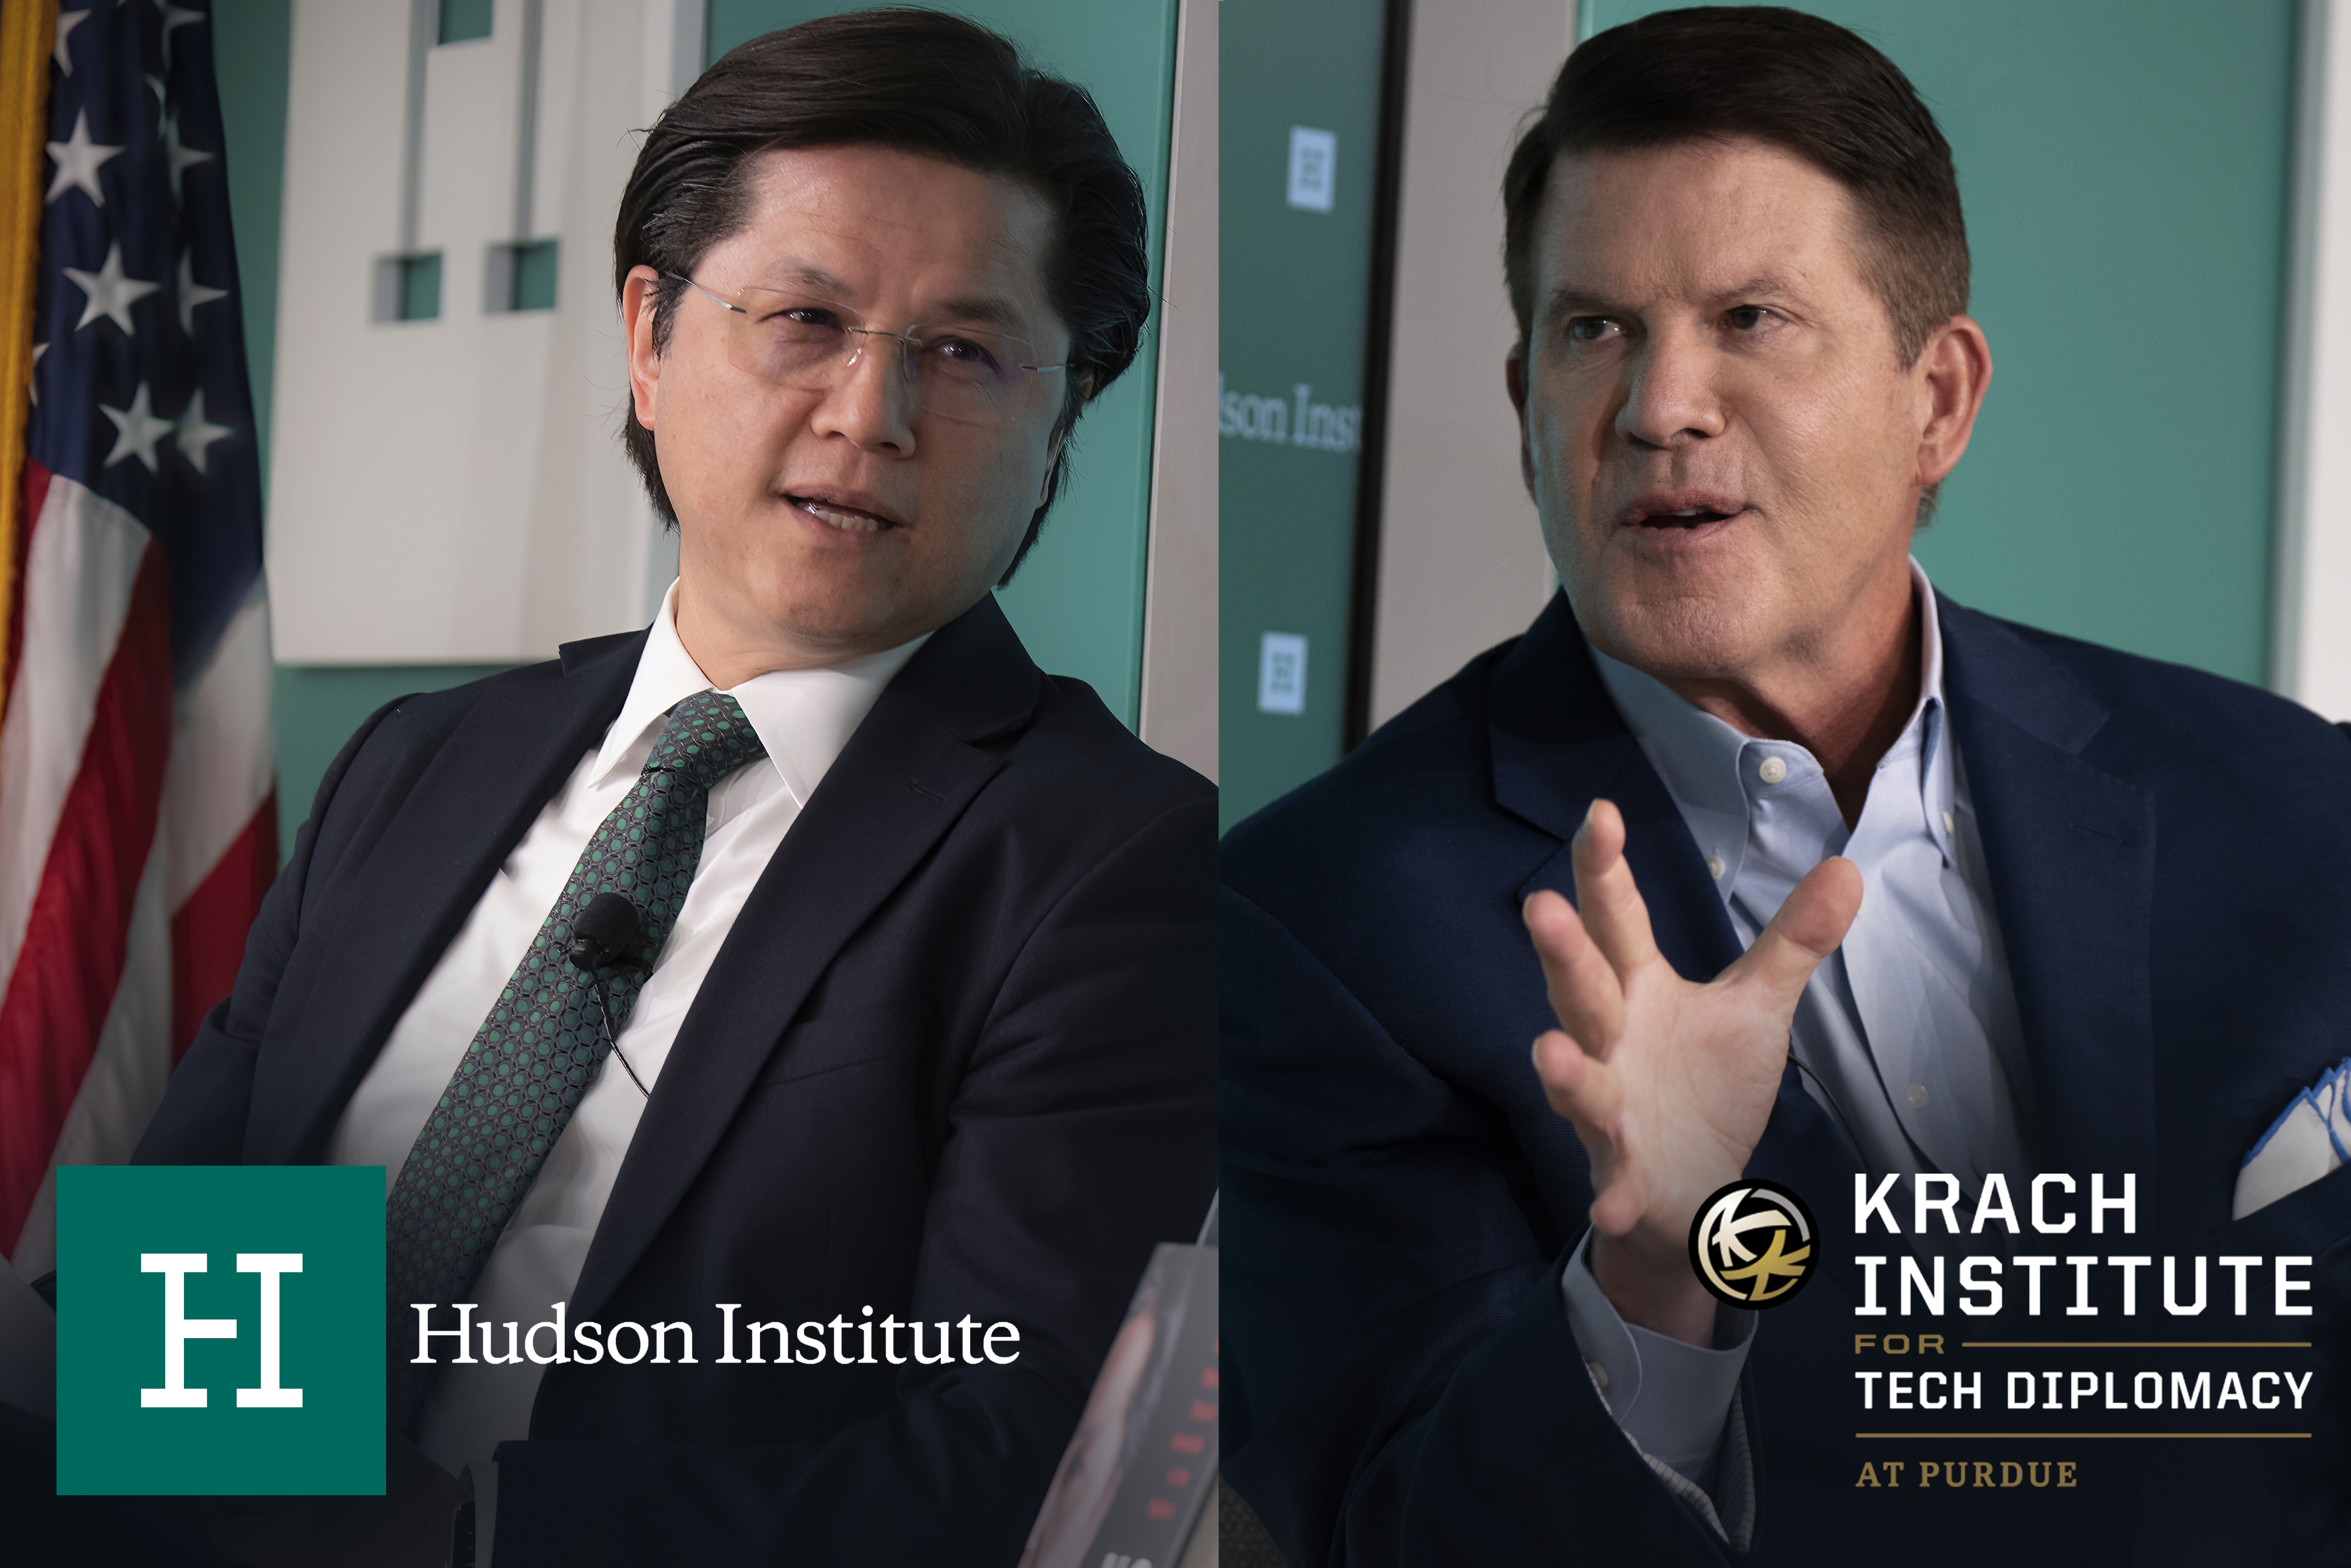 Keith-Krach-Krach-Institute-for-Tech-Diplomacy-and-Hudson-Institute